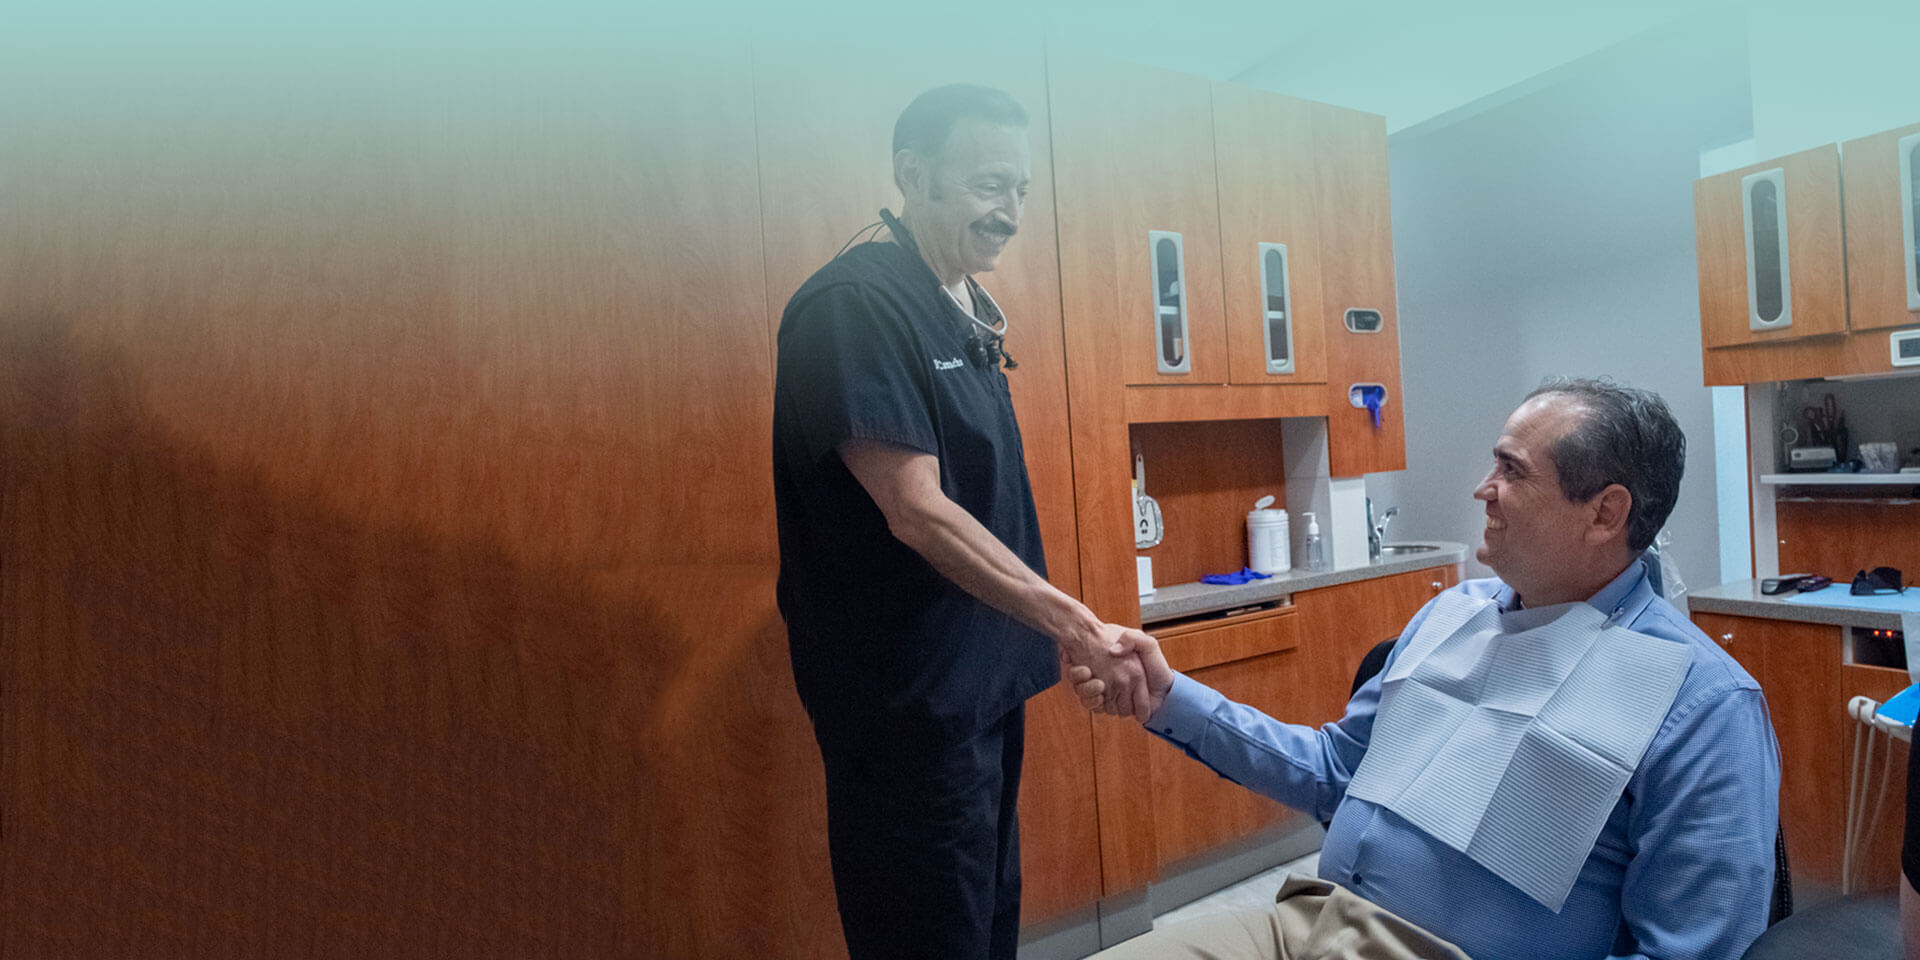 Dr. Edward Camacho shaking hands with patient